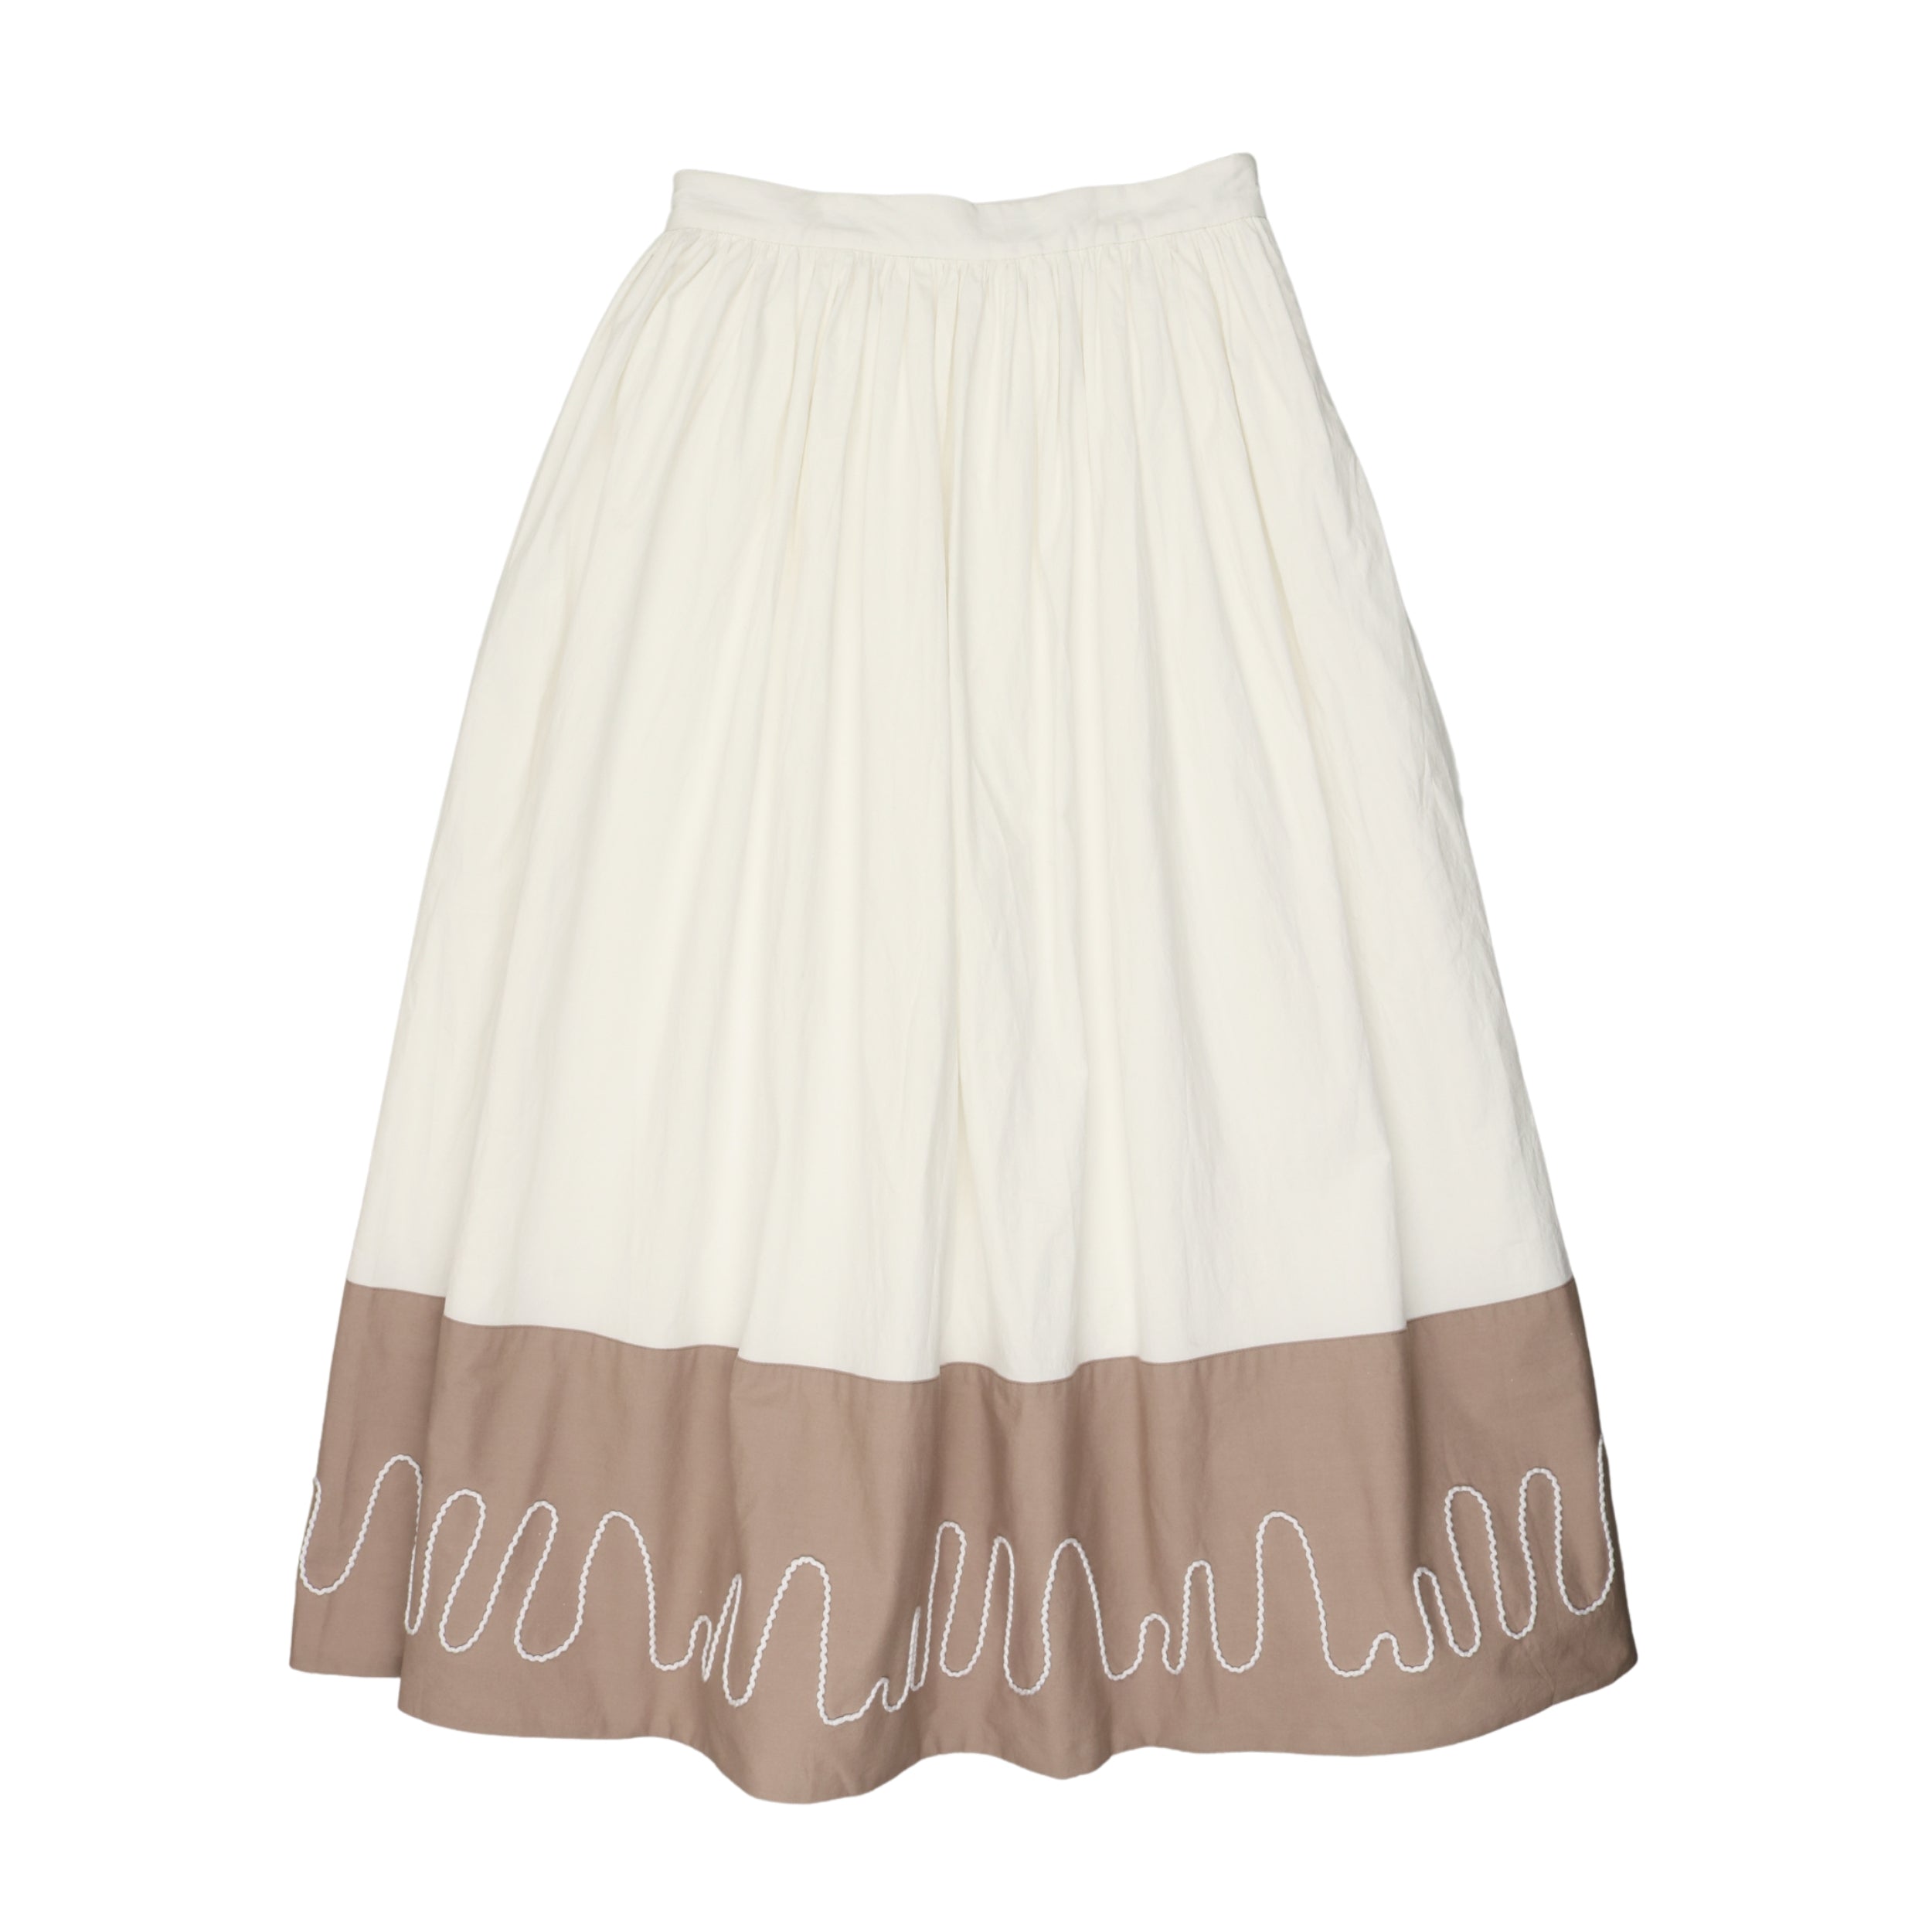 Ivory/Taupe Colorblock Skirt